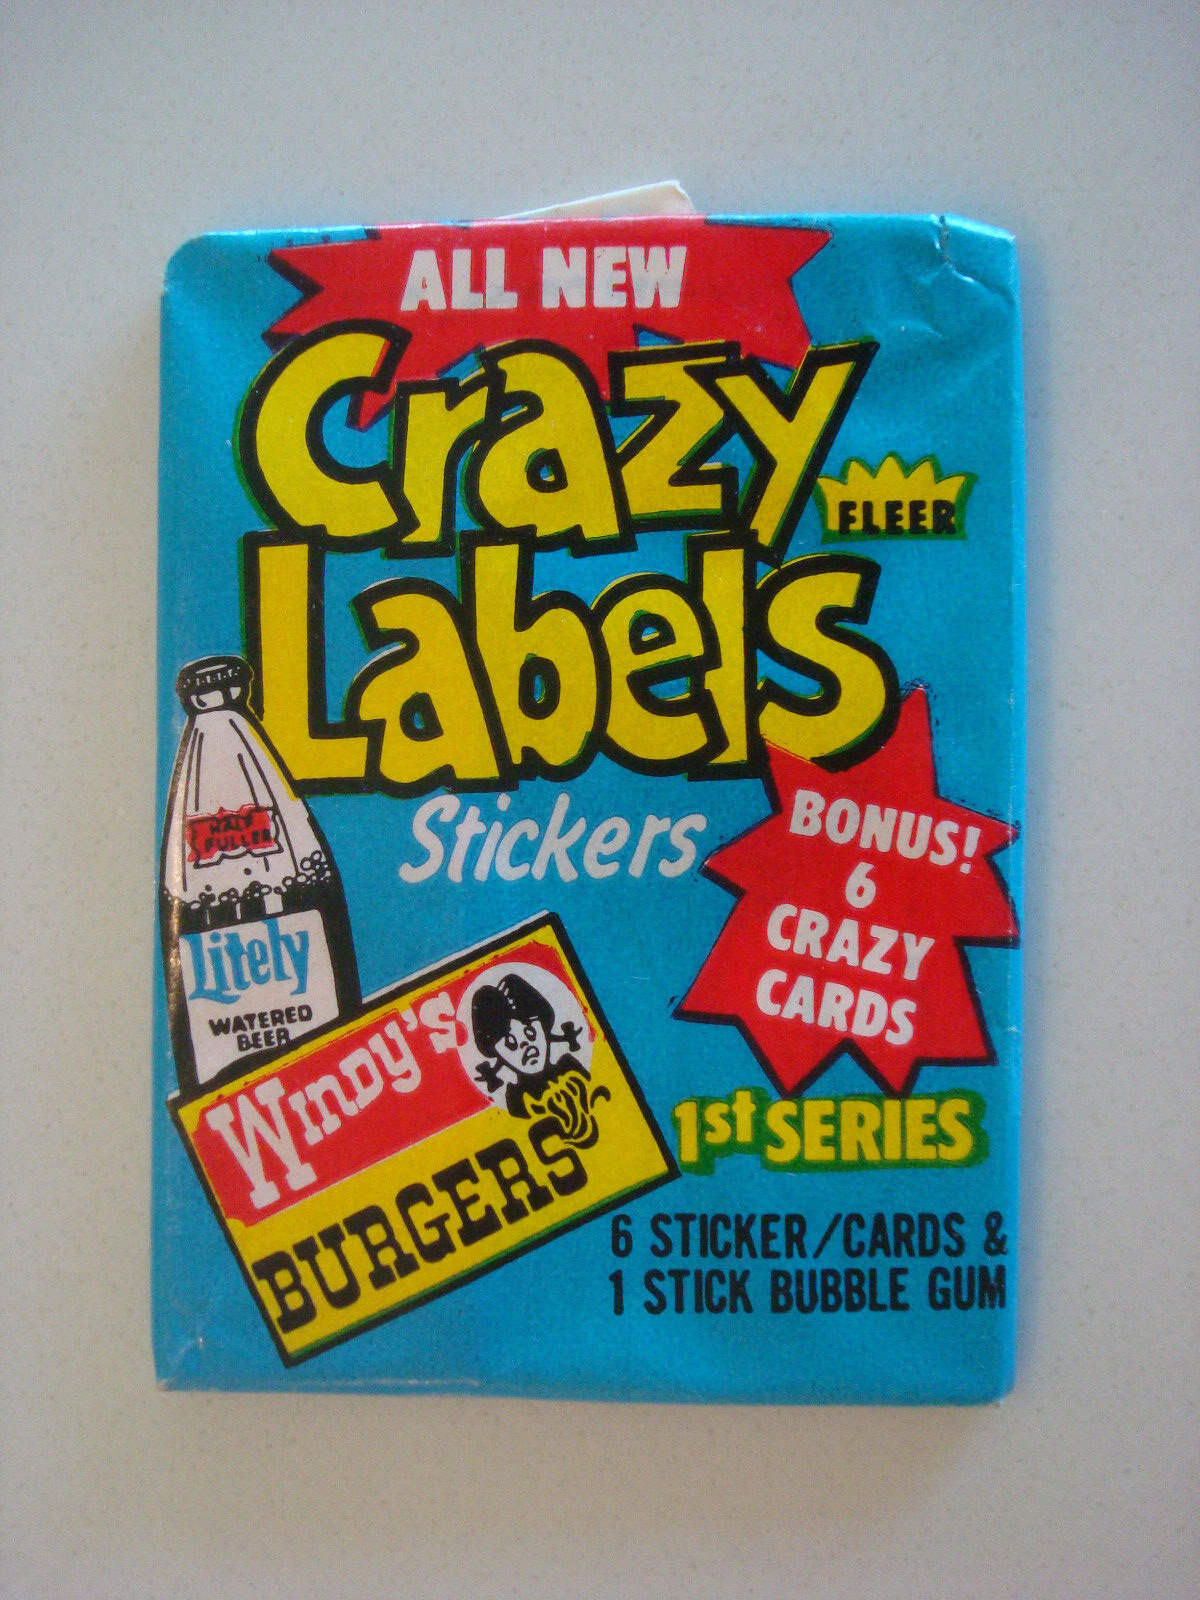 1979 Fleer Crazy Labels Trading Cards, Stickers, & Gum Sealed Wax Pack